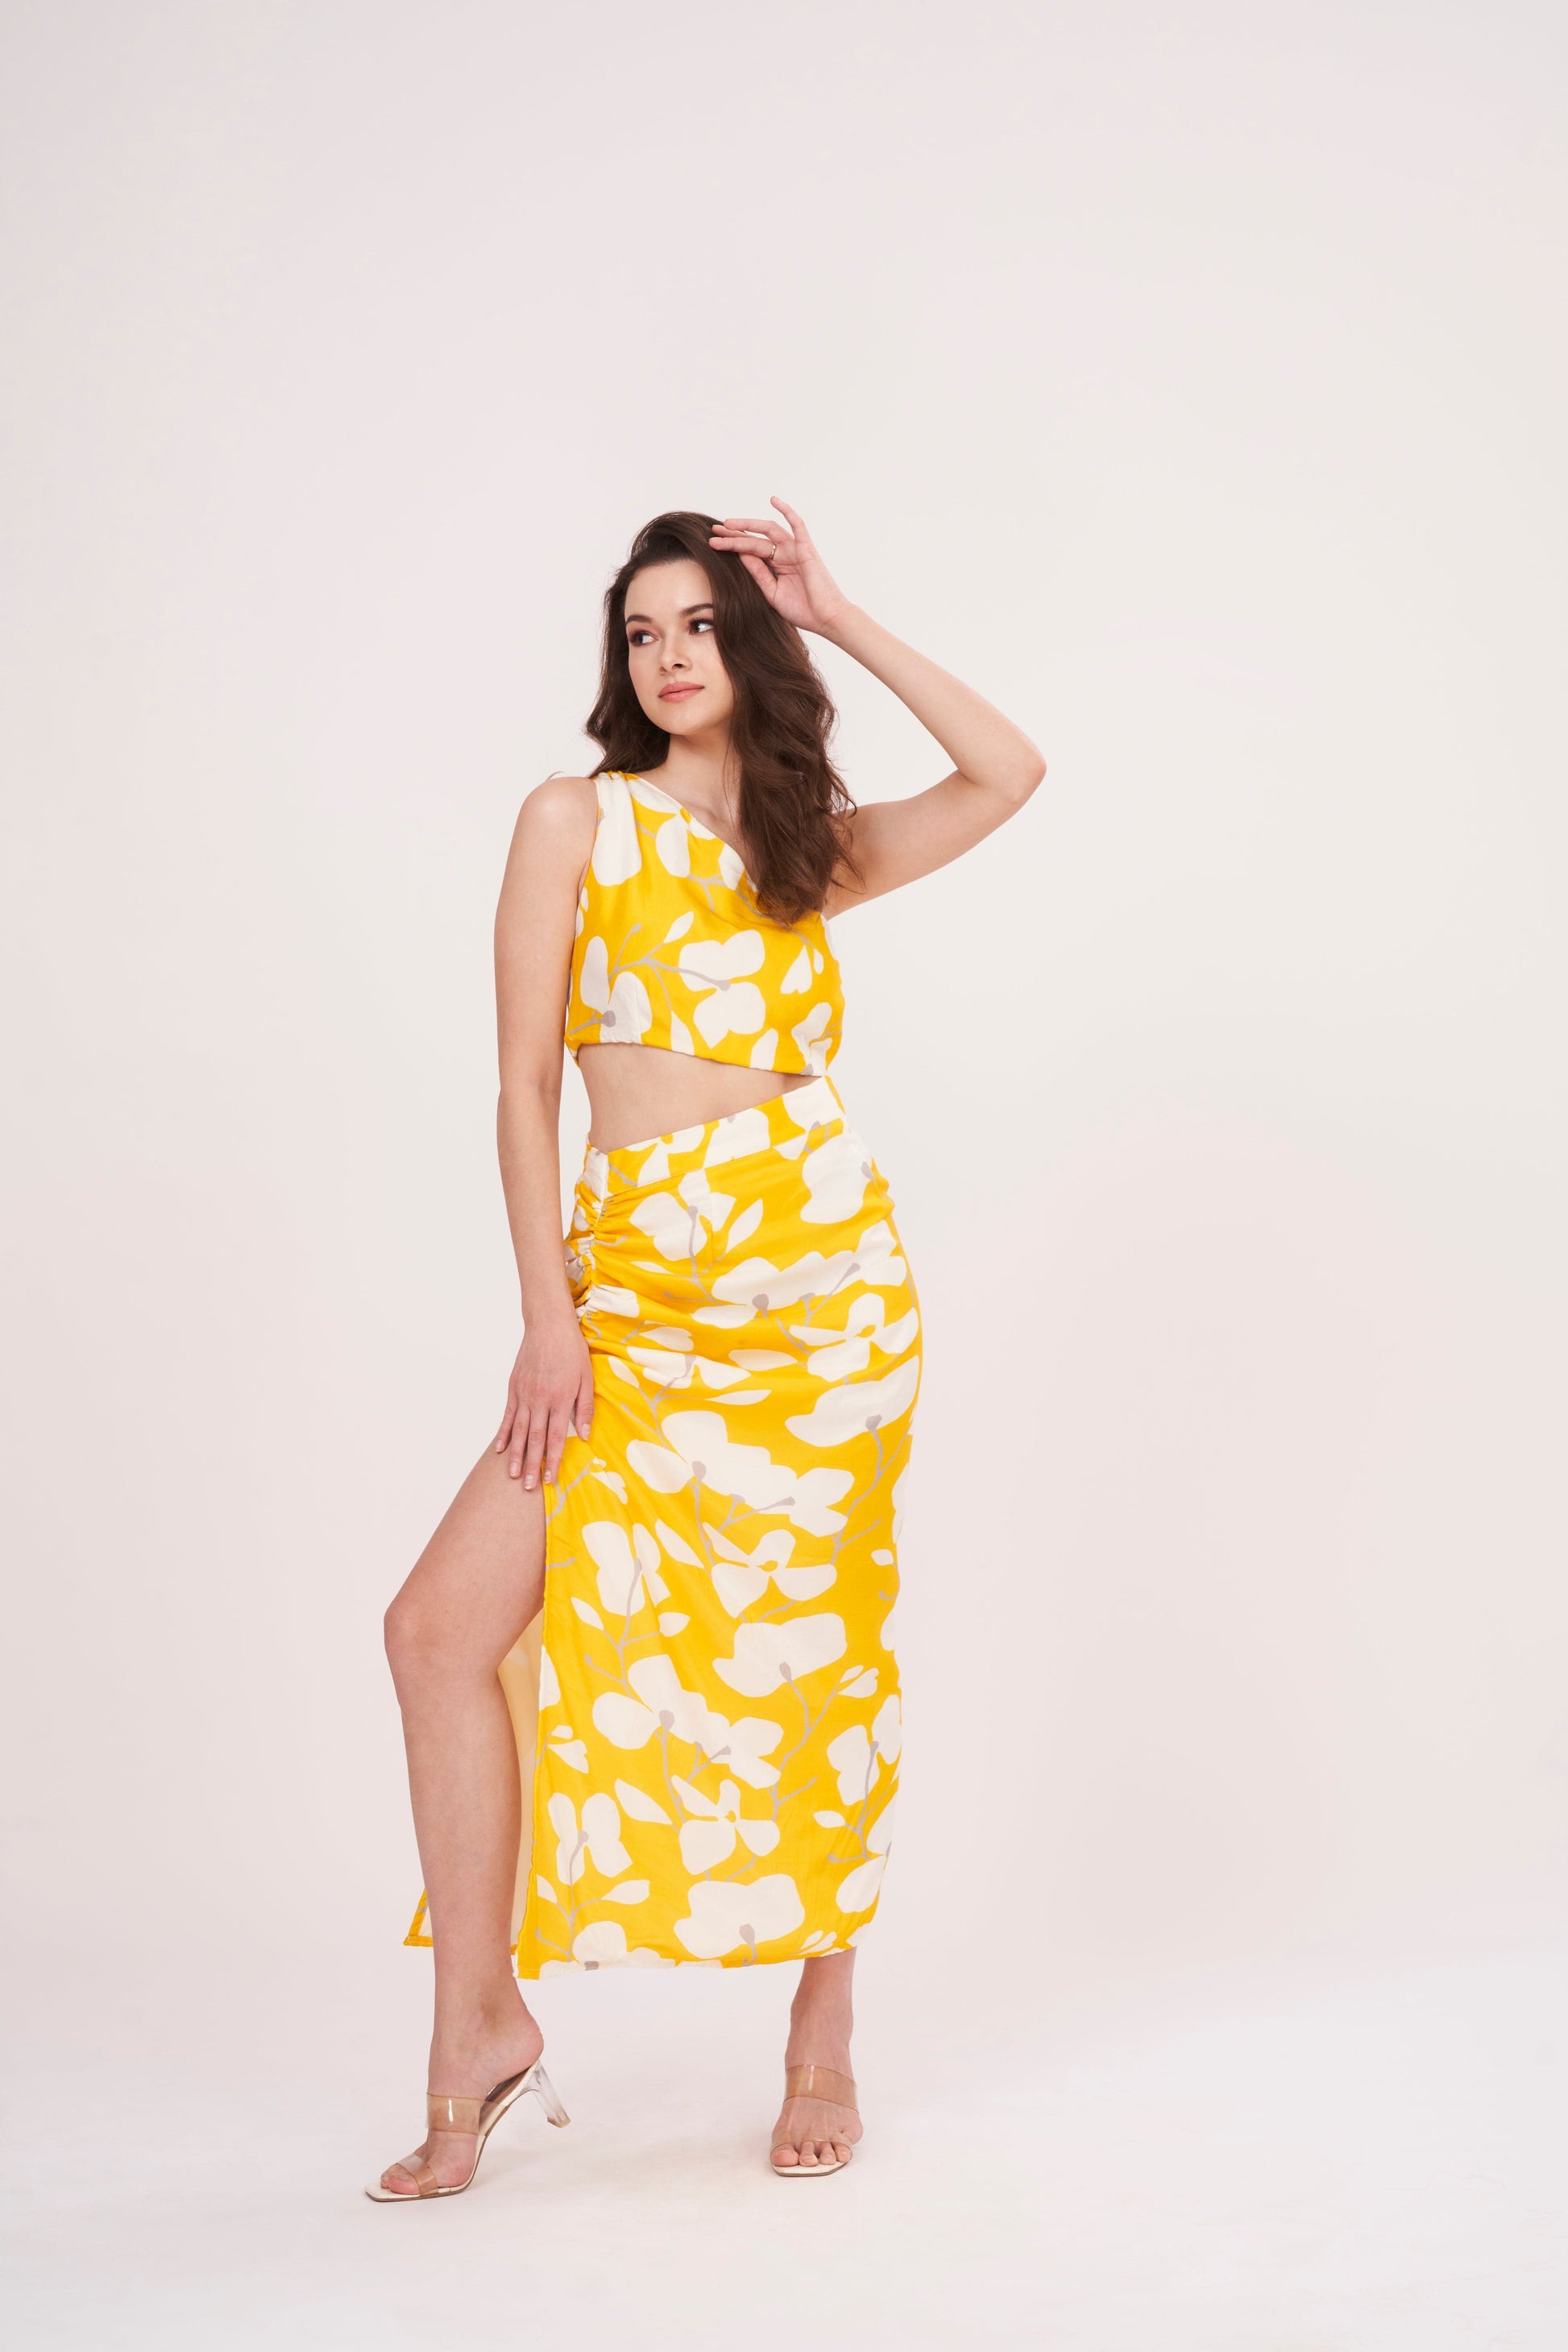 Elegant one-shoulder yellow top designed to flatter waist and accentuate curves. Lightweight fabric ensures comfort and coolness, perfect for summer outings.